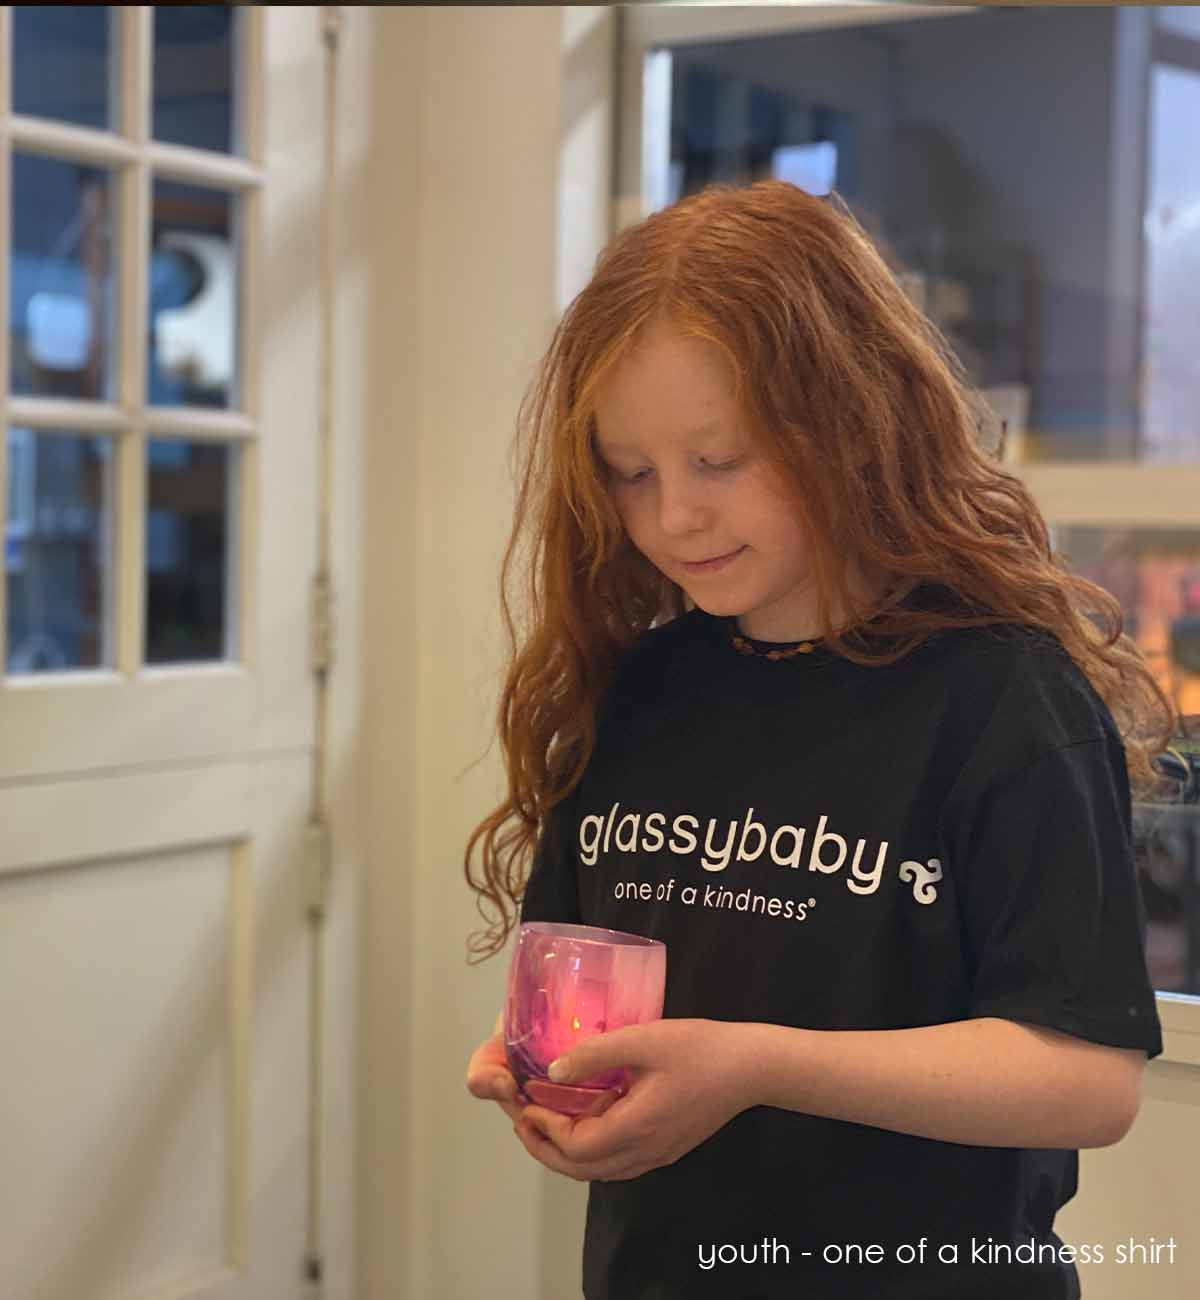 glassybaby one of a kindness in white printed on a black cotton t-shirt